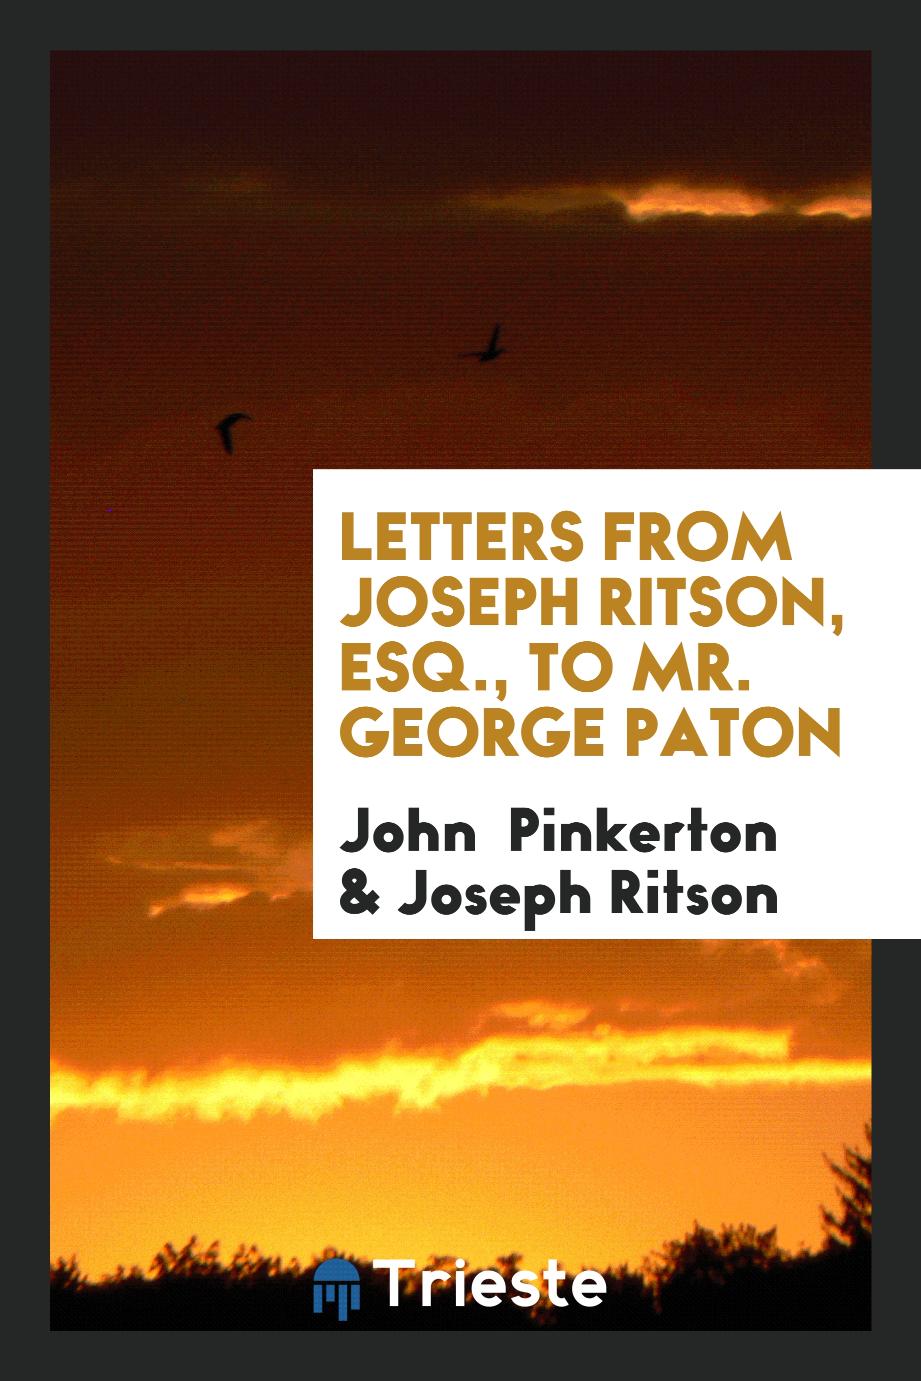 Letters from Joseph Ritson, Esq., to Mr. George Paton